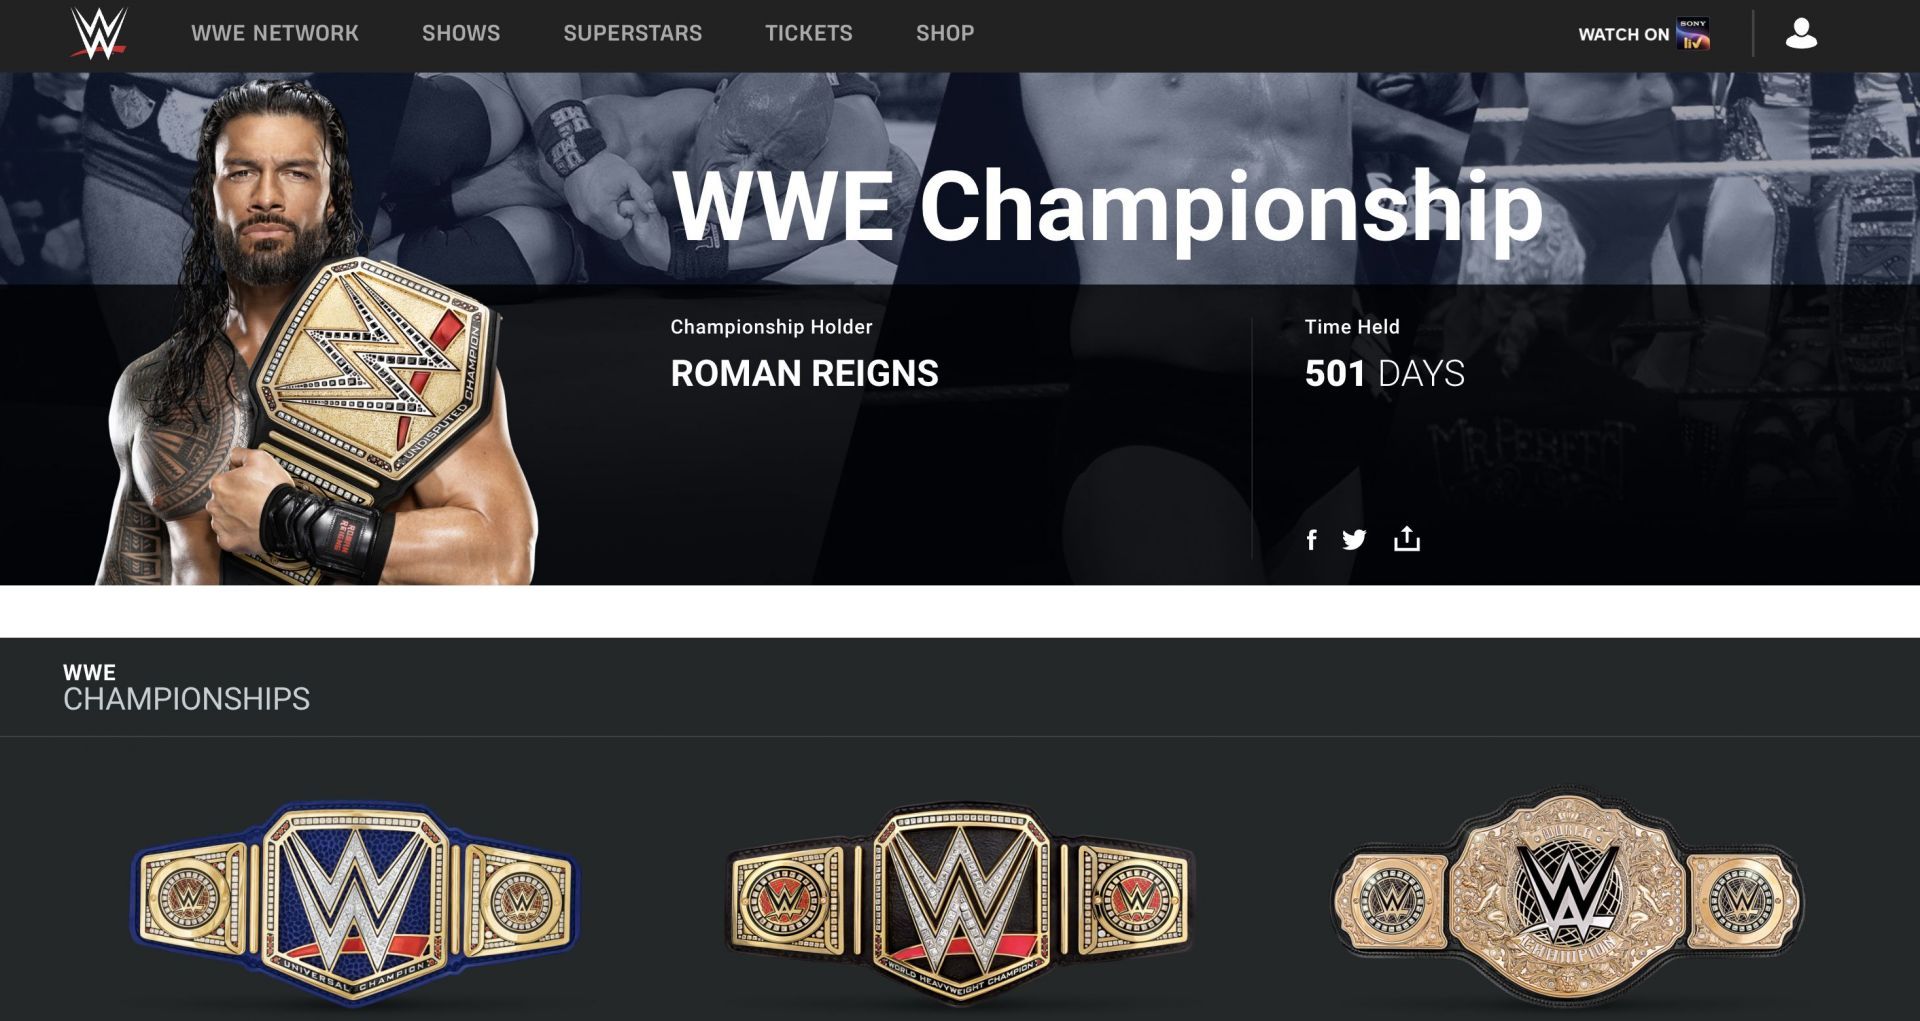 Reigns has held the WWE Championship for 501 days.